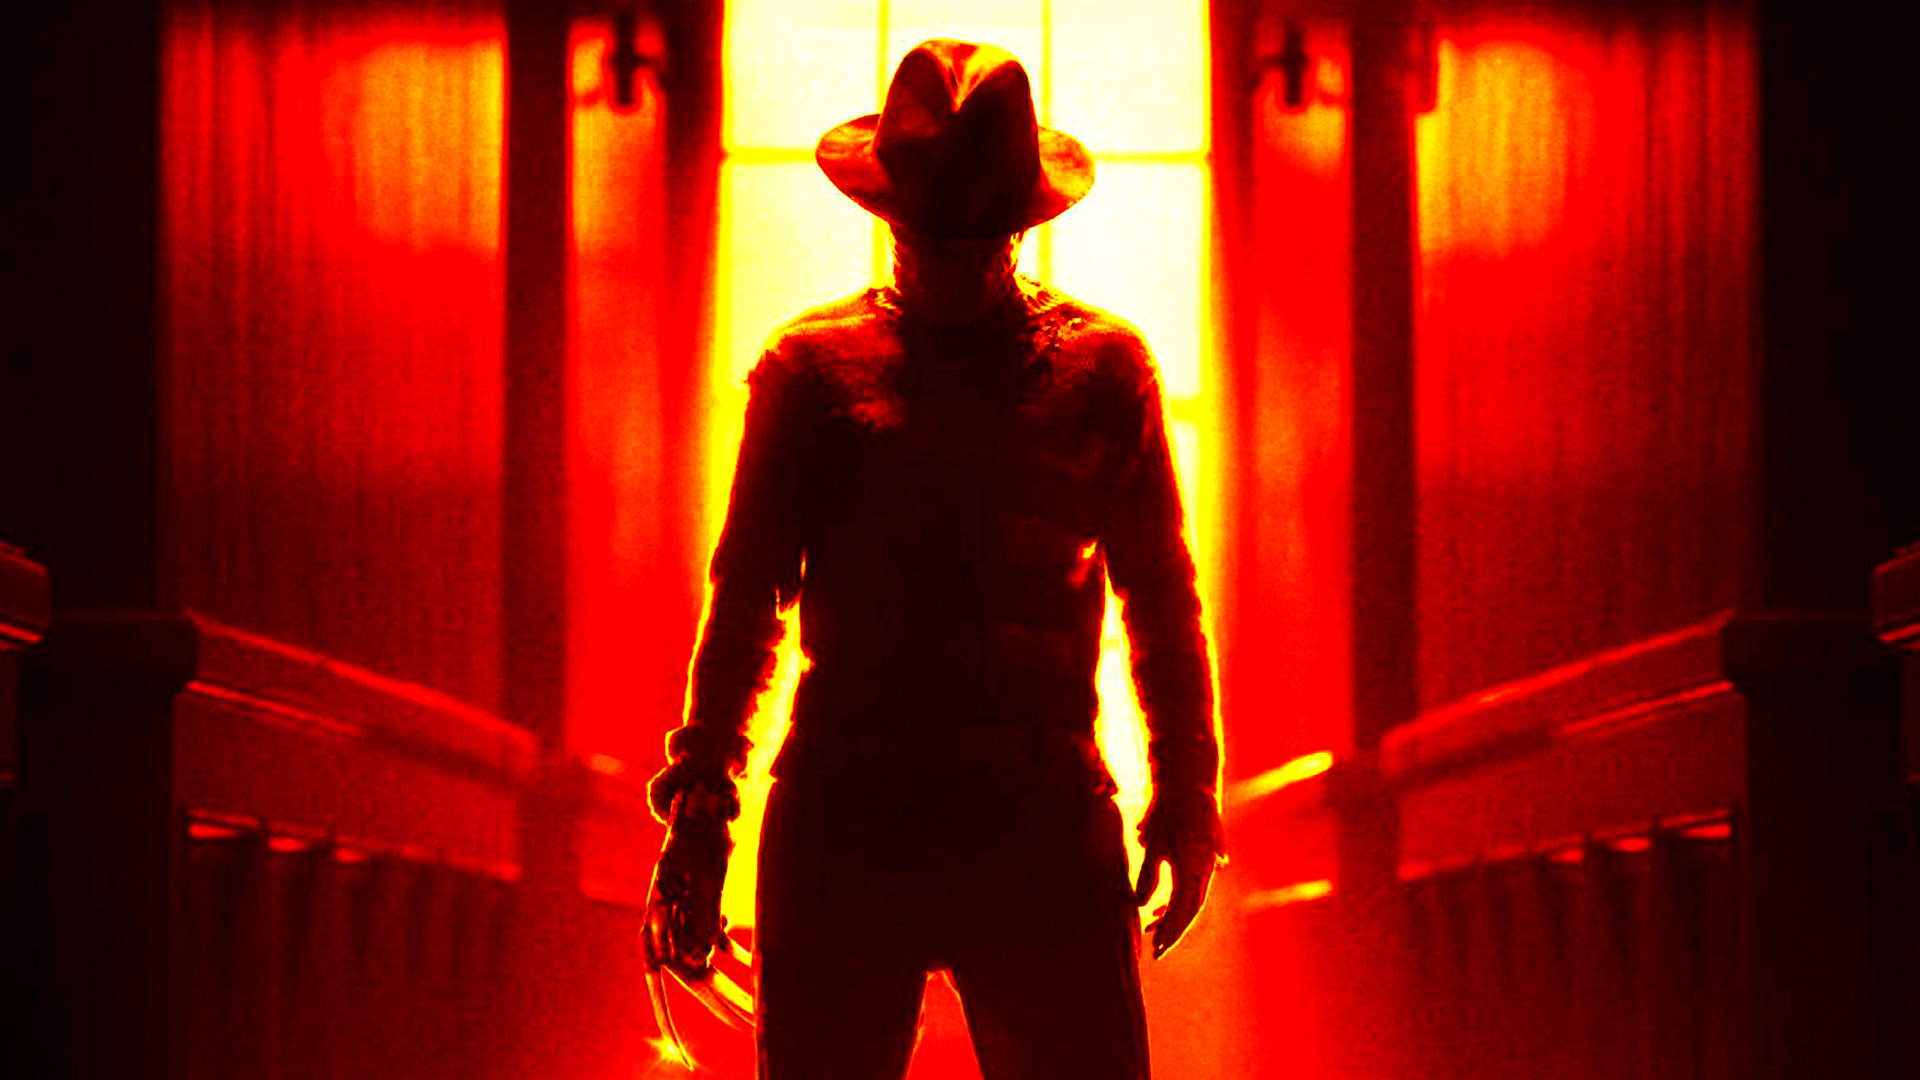 A Nightmare on Elm Street: Son of a Hundred Maniacs